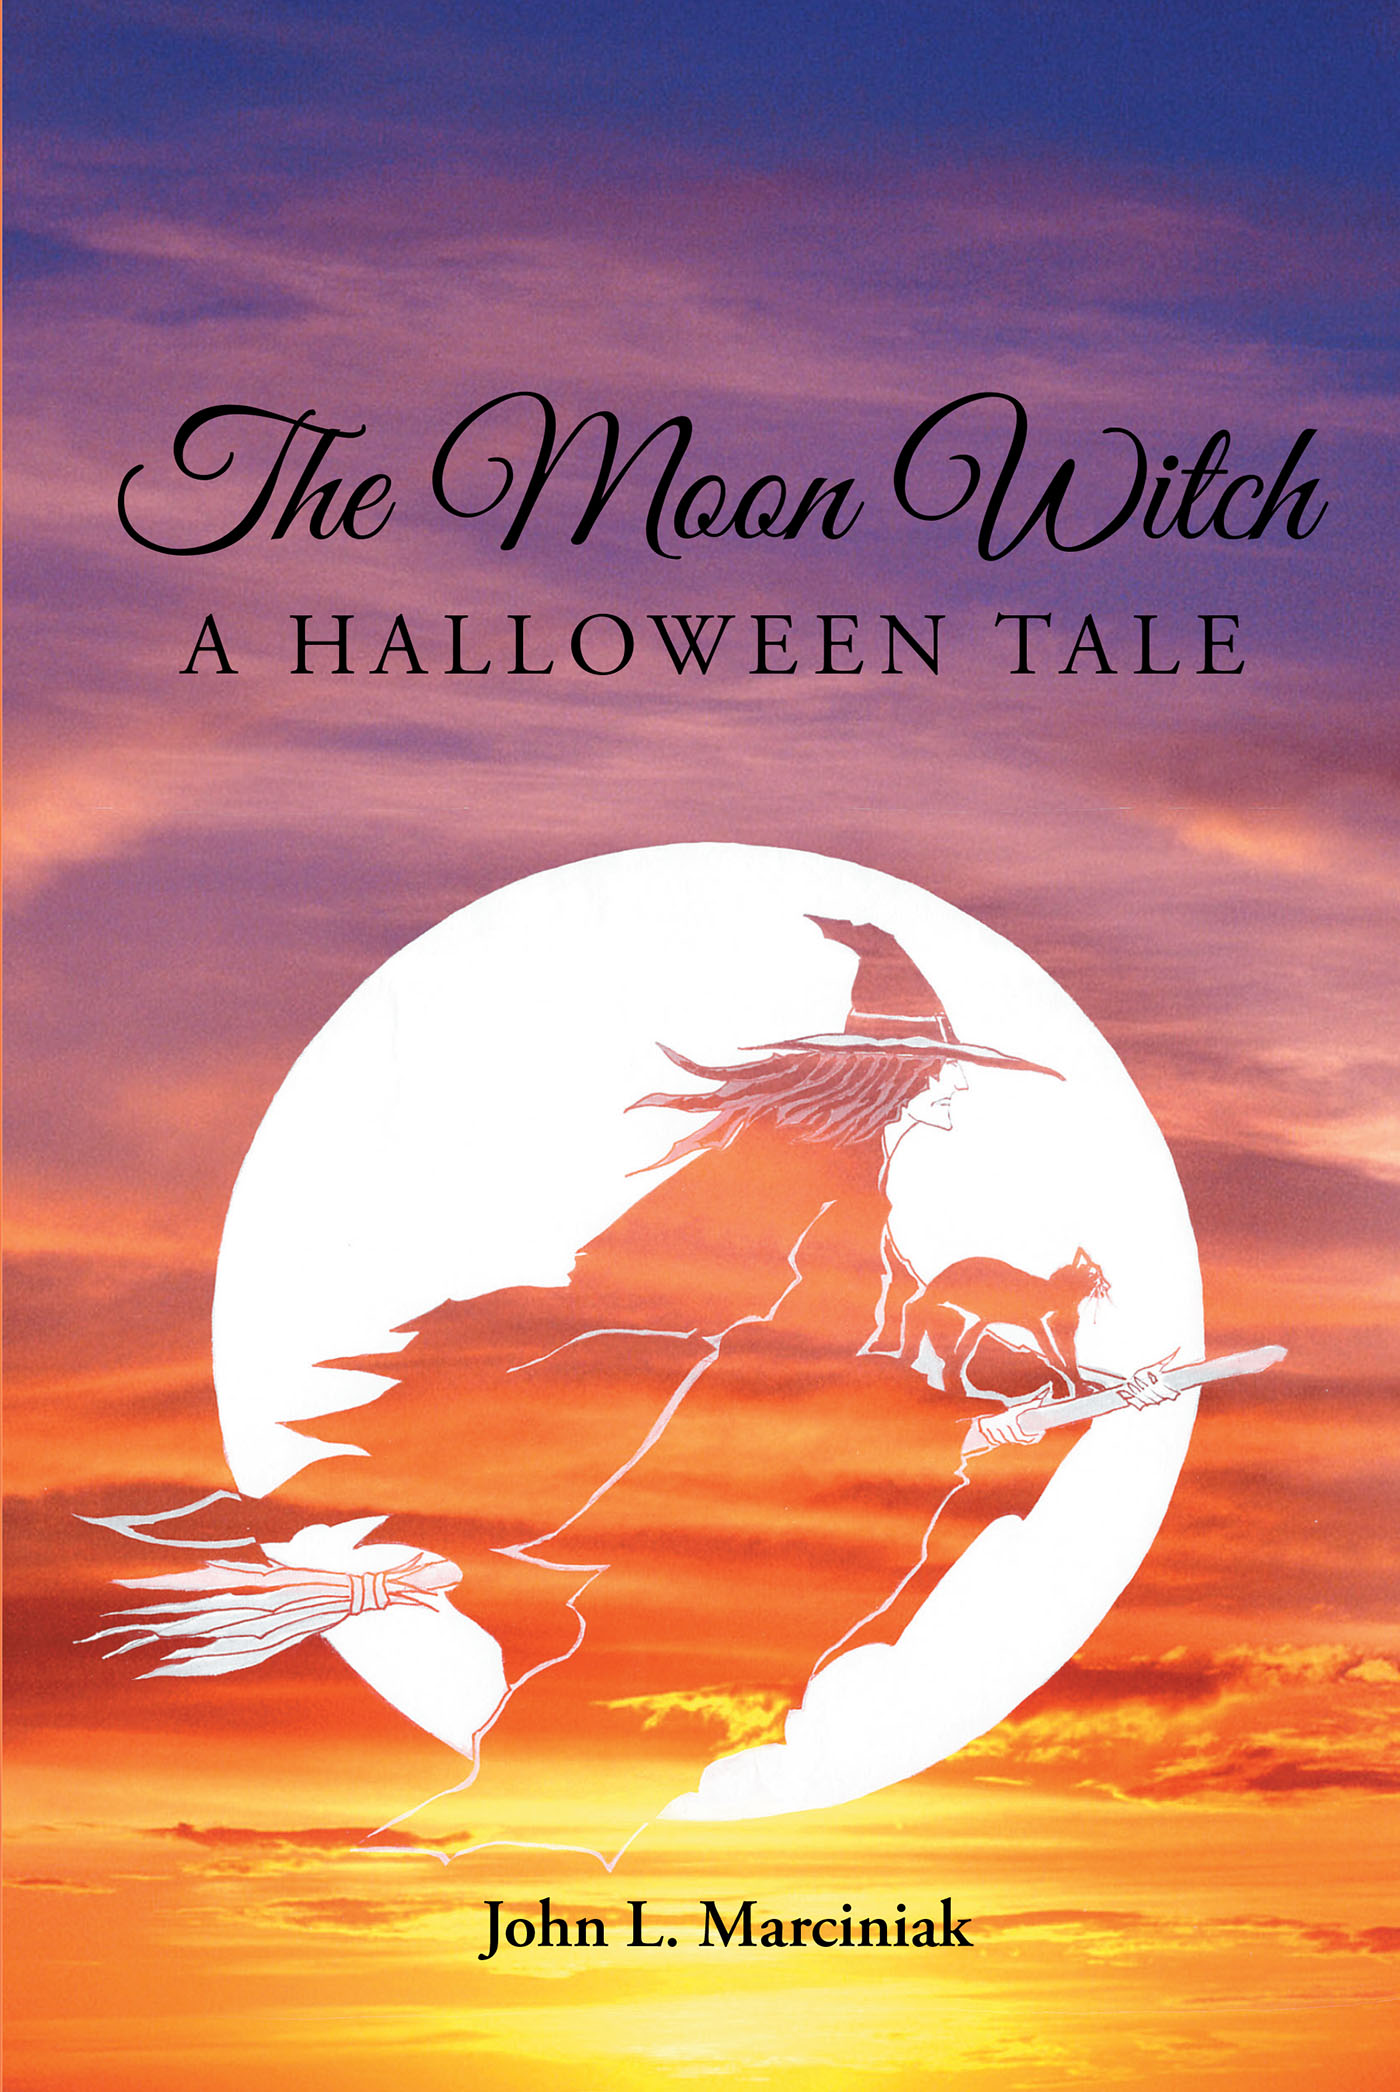 Author John L. Marciniak’s New Book, “The Moon Witch: A Halloween Tale,”  Centers Around Two Witches Who Compete for the Ultimate Title of Being the Moon Witch